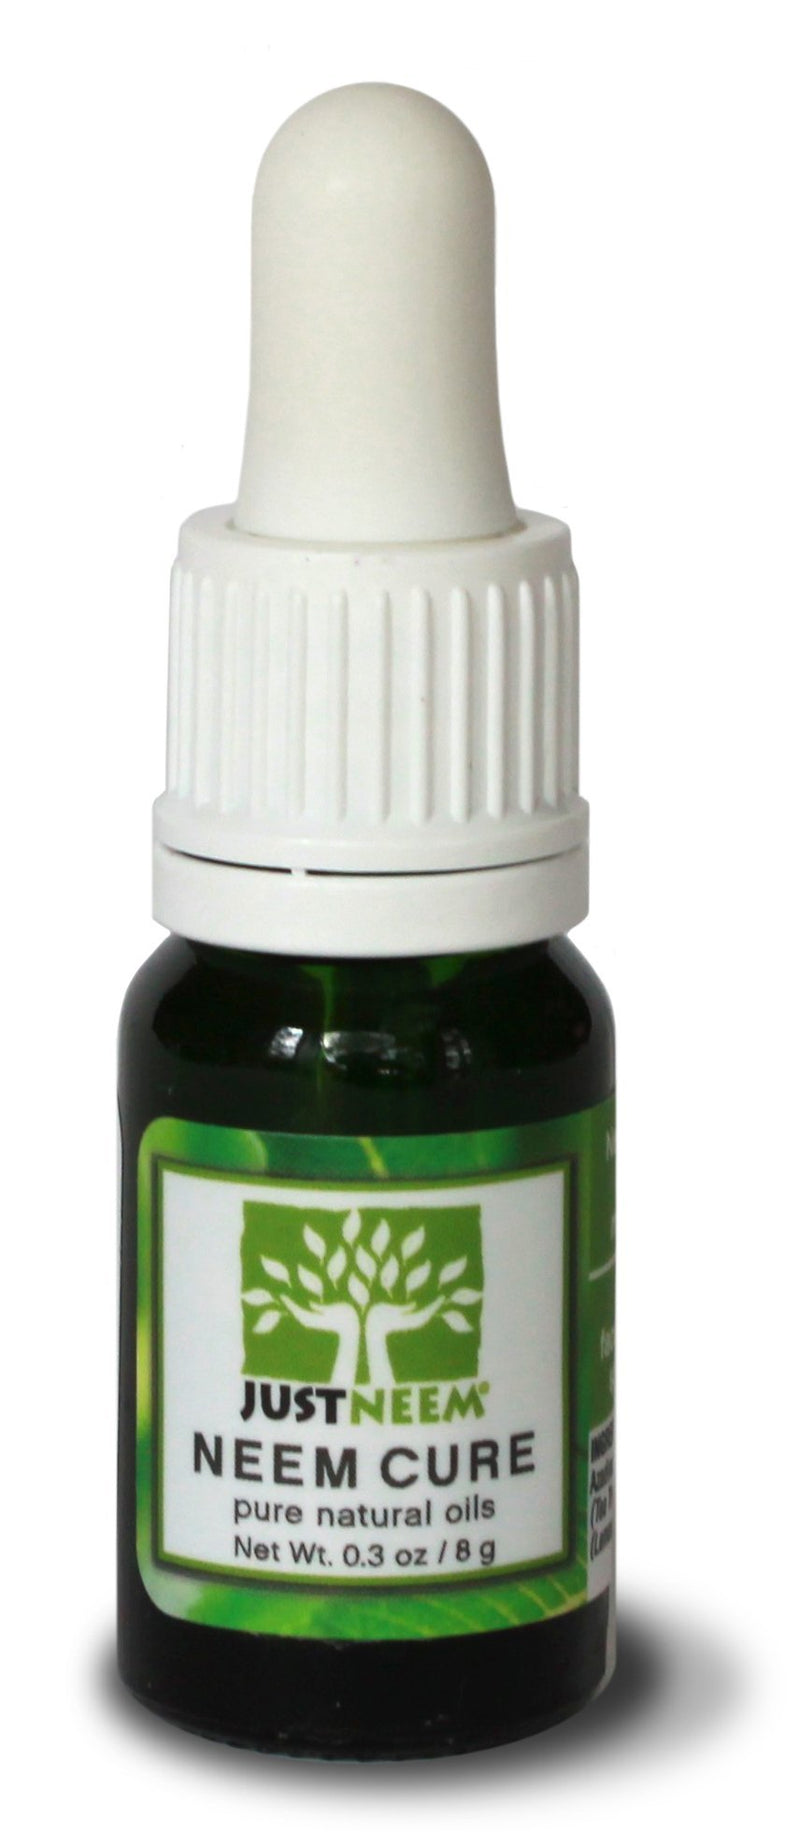 JustNeem Neem Cure Oil - Natural - Best on Acne, Psoriasis, Eczema, Rosacea, Cold Sores, Fungal Infections, Bug and Spider Bites and other Skin Irritations. With Dropper Cap Applicator. - 0.3 oz - BeesActive Australia